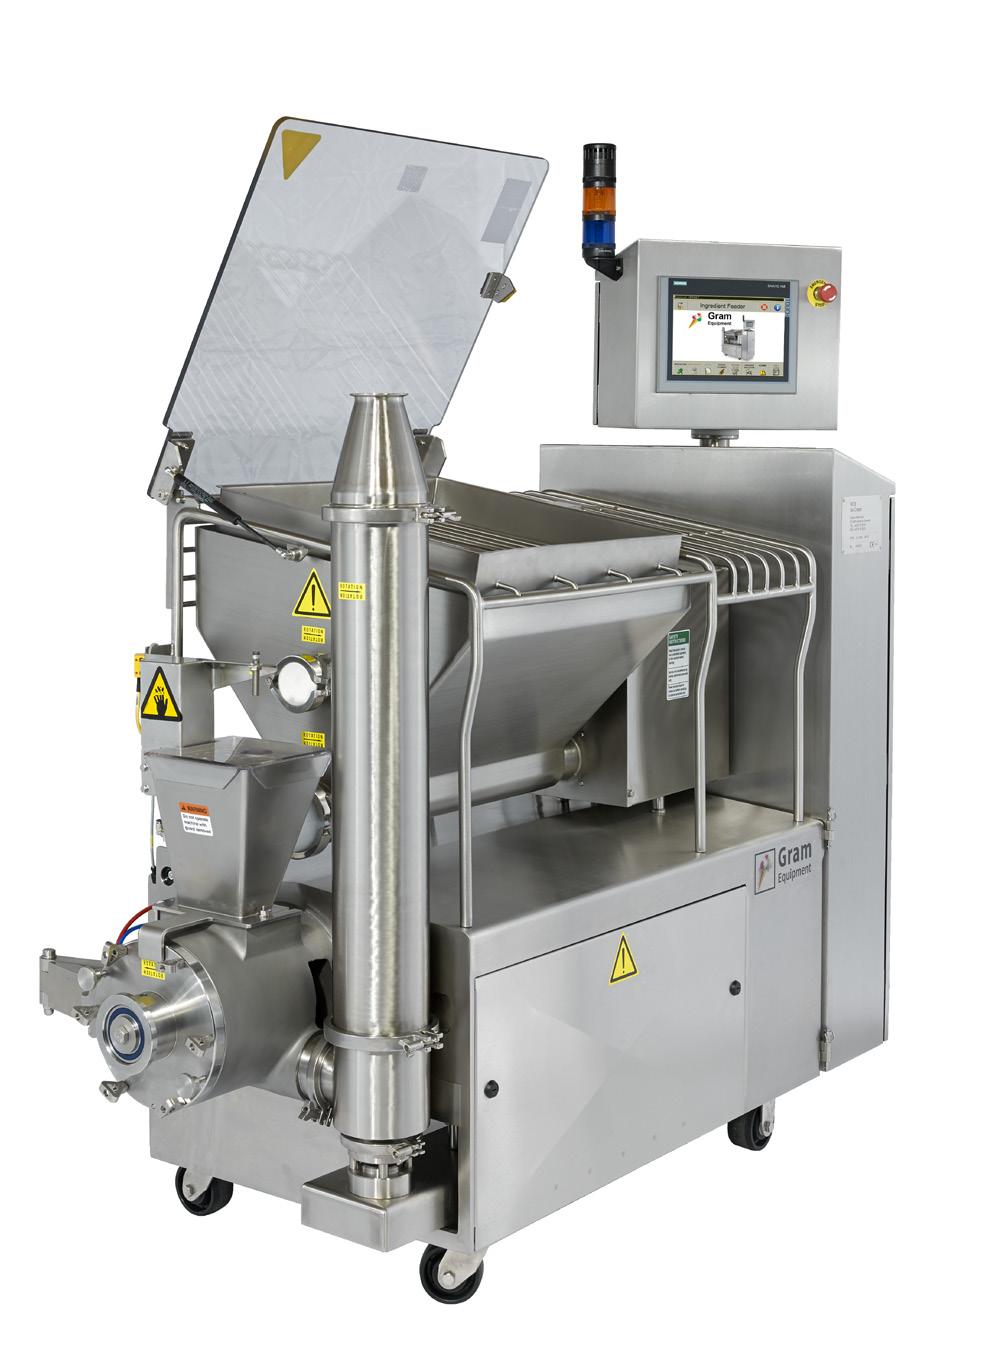 Gram Equipment IF 820-1230 High capacity with flexibility Highly efficient, flexible and reliable - for a large variety of ice cream products.